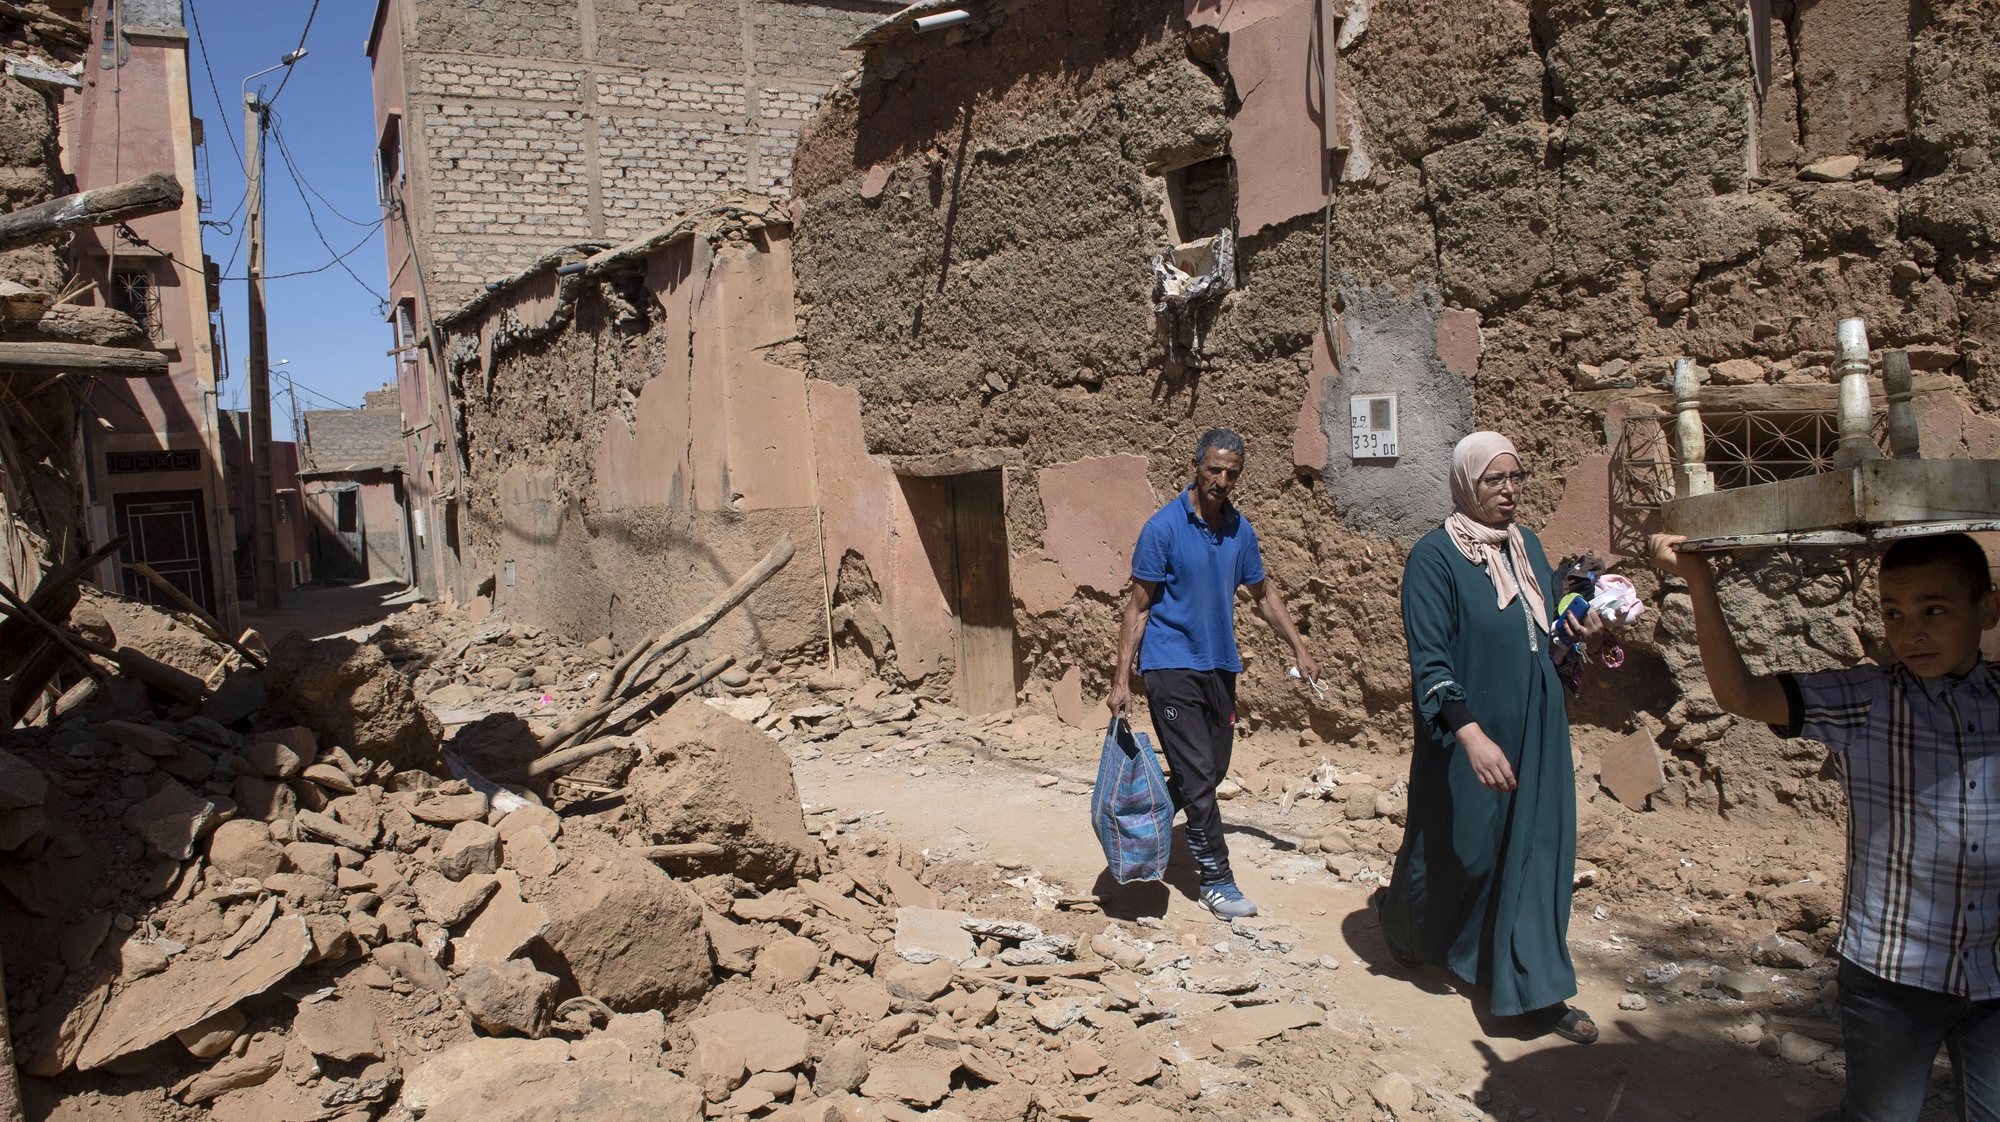 epa10852575 Members of a family walk past damaged buildings in Amizmiz, south of Marrakesh, Morocco, 10 September 2023, following a powerful earthquake. A magnitude 6.8 earthquake that struck central Morocco late 08 September has killed at least 2,012 people and injured 2,059 others, 1,404 of whom are in serious condition, damaging buildings from villages and towns in the Atlas Mountains to Marrakesh, according to a report released by the country&#039;s Interior Ministry. The earthquake has affected more than 300,000 people in Marrakesh and its outskirts, the UN Office for the Coordination of Humanitarian Affairs (OCHA) said. Morocco&#039;s King Mohammed VI on 09 September declared a three-day national mourning for the victims of the earthquake.  EPA/JALAL MORCHIDI